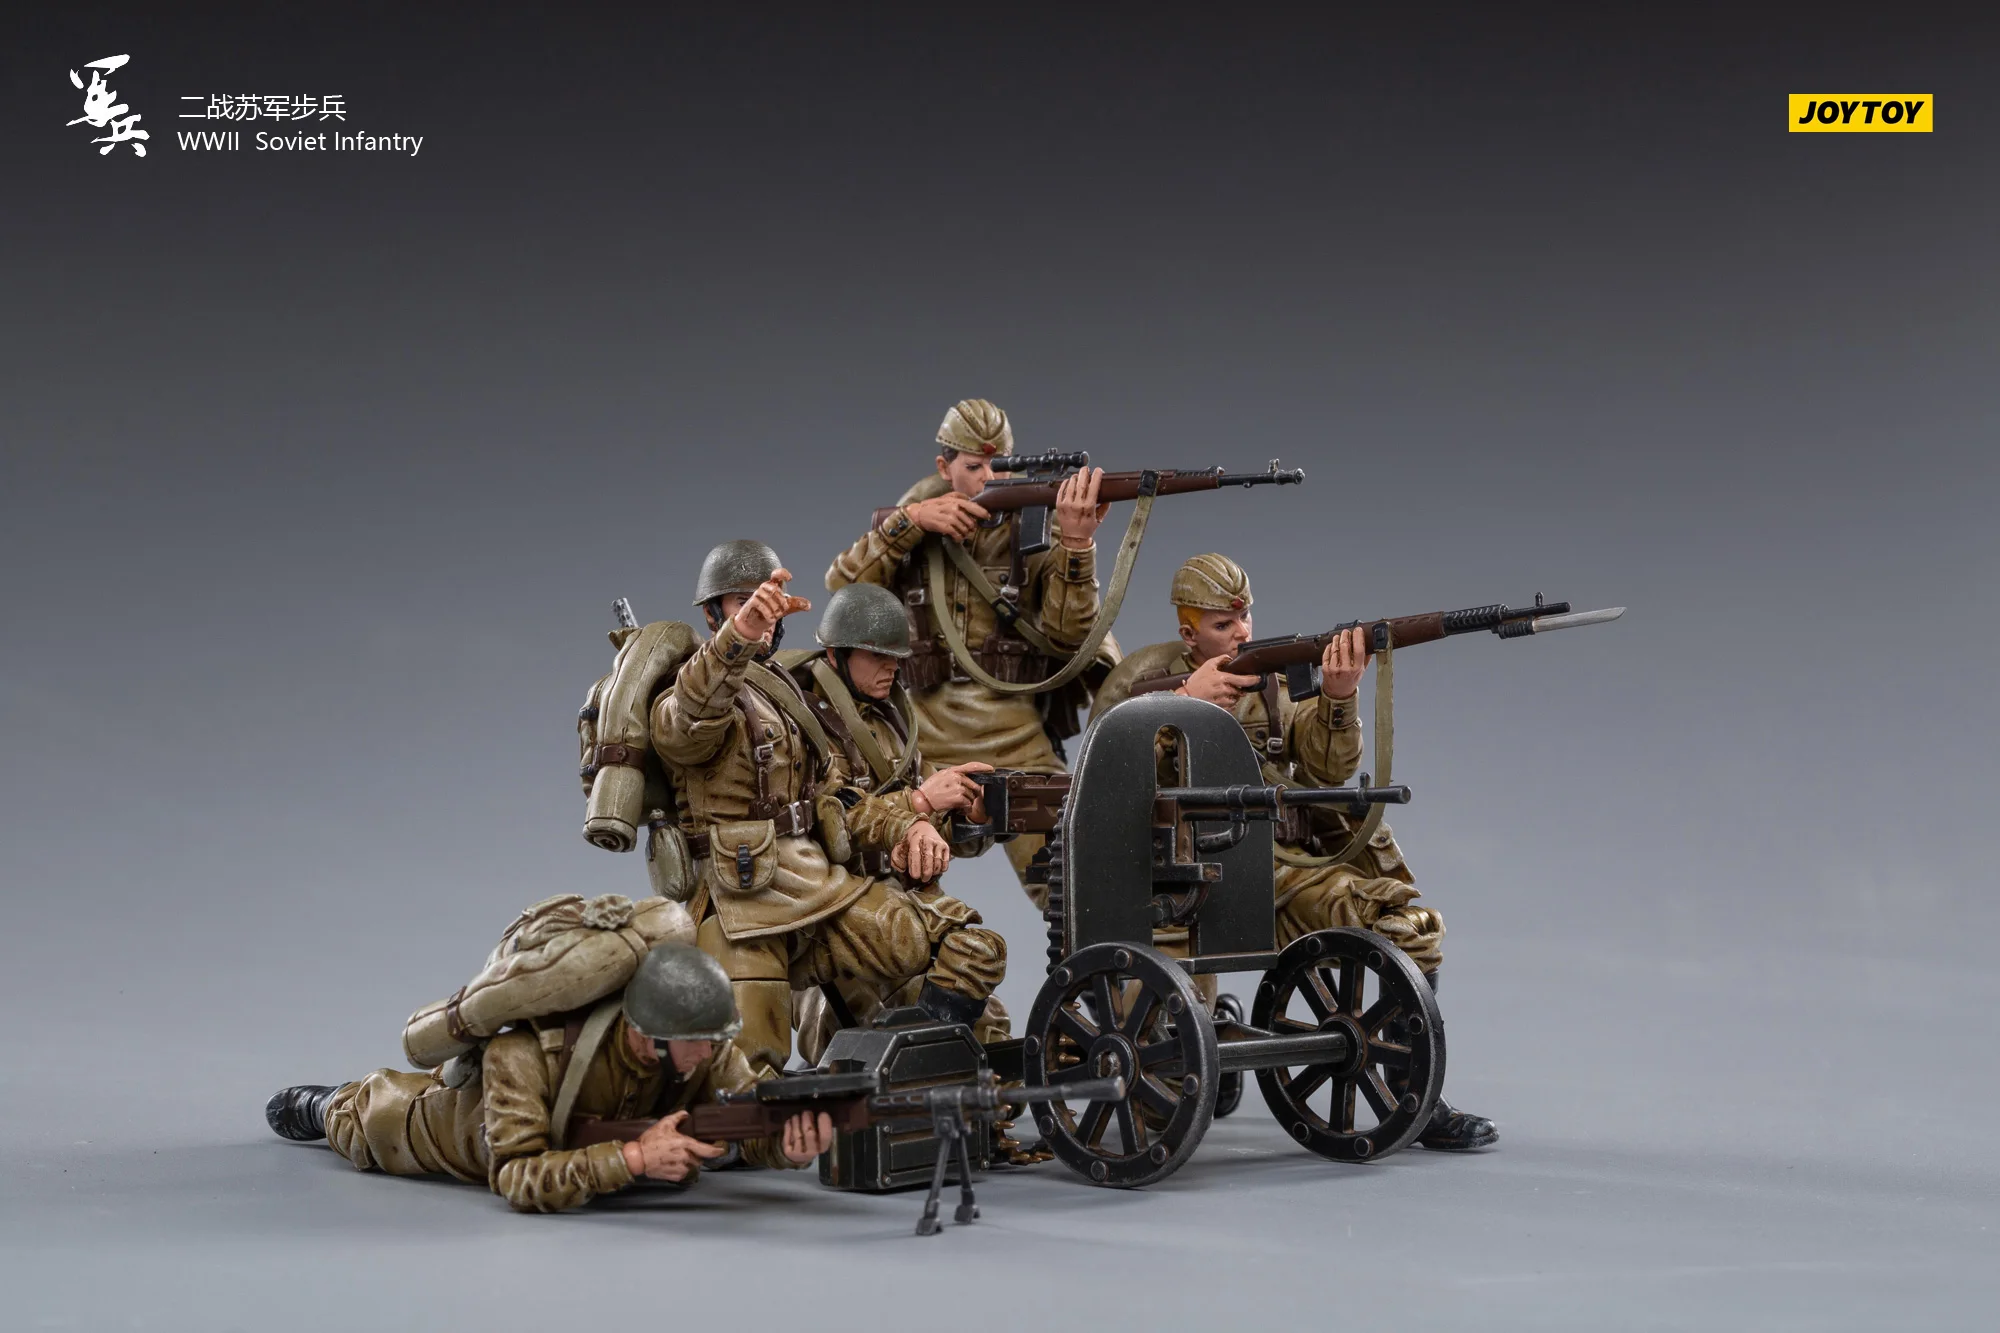 Details about   JOYTOY 1/18 Action Figures 5PCS WWII Soviet Infantry Steel Ride ChiLean Soldiers